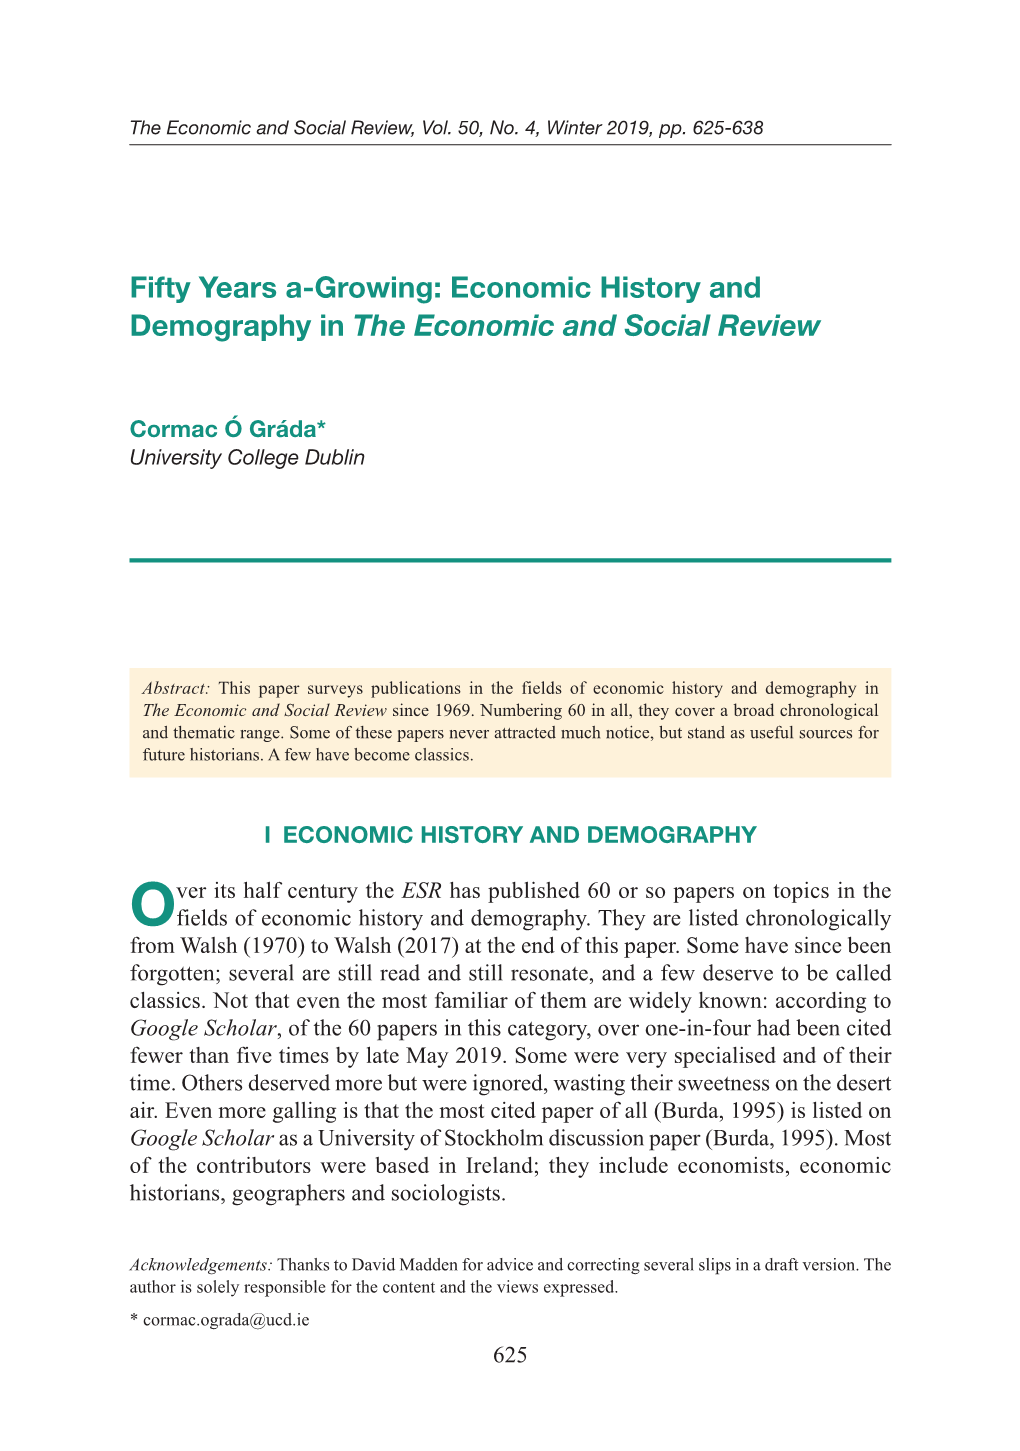 Economic History and Demography in the Economic and Social Review